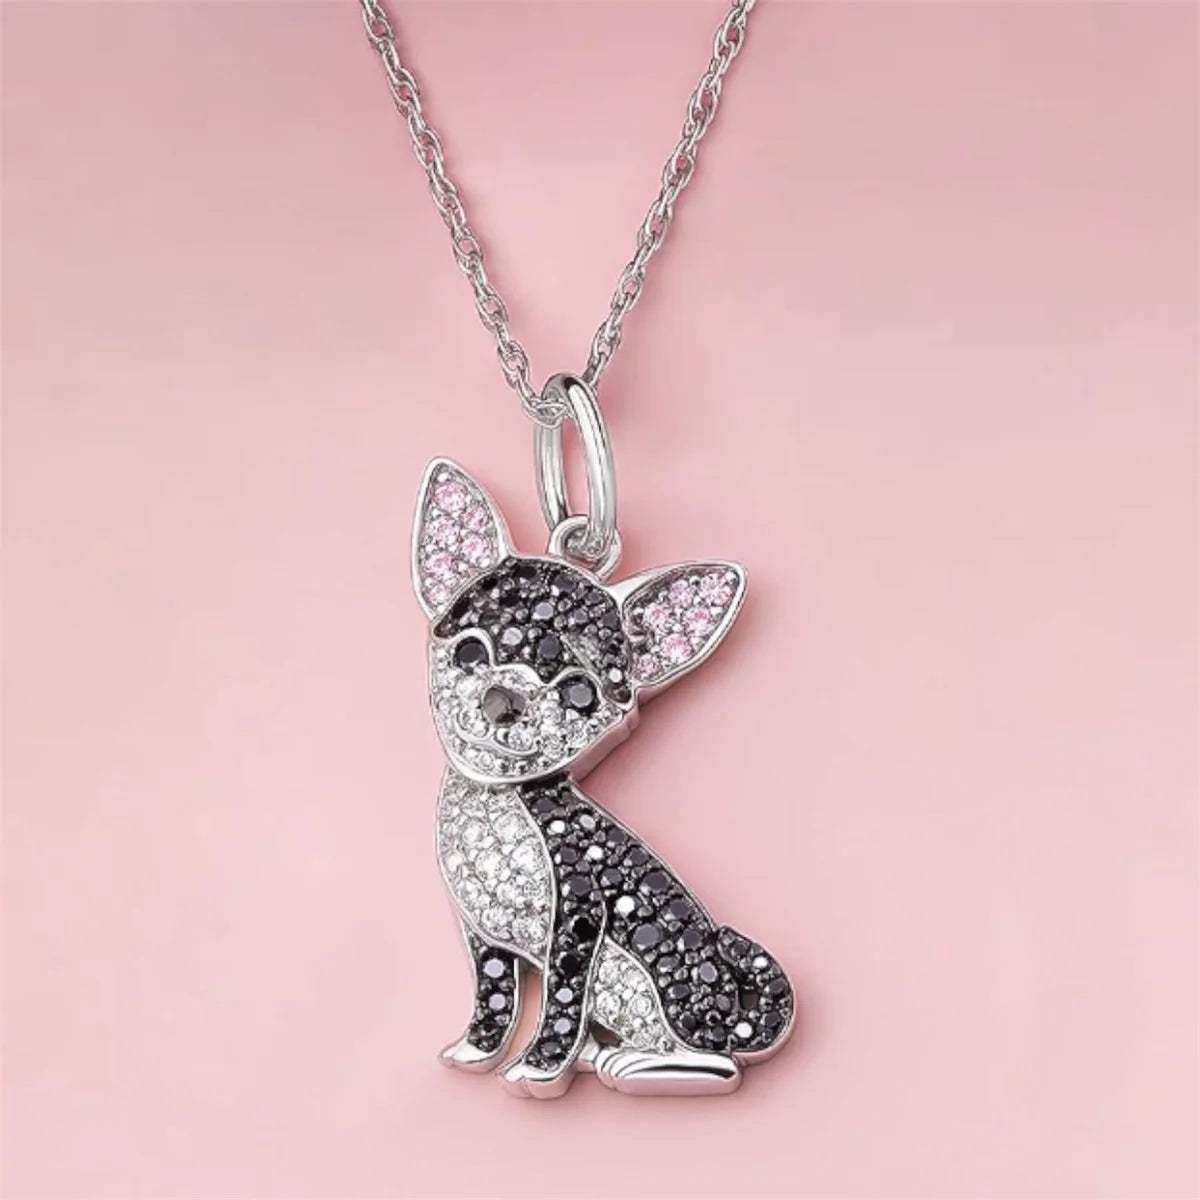 Cute Chihuahua Pendant Necklace For Women's